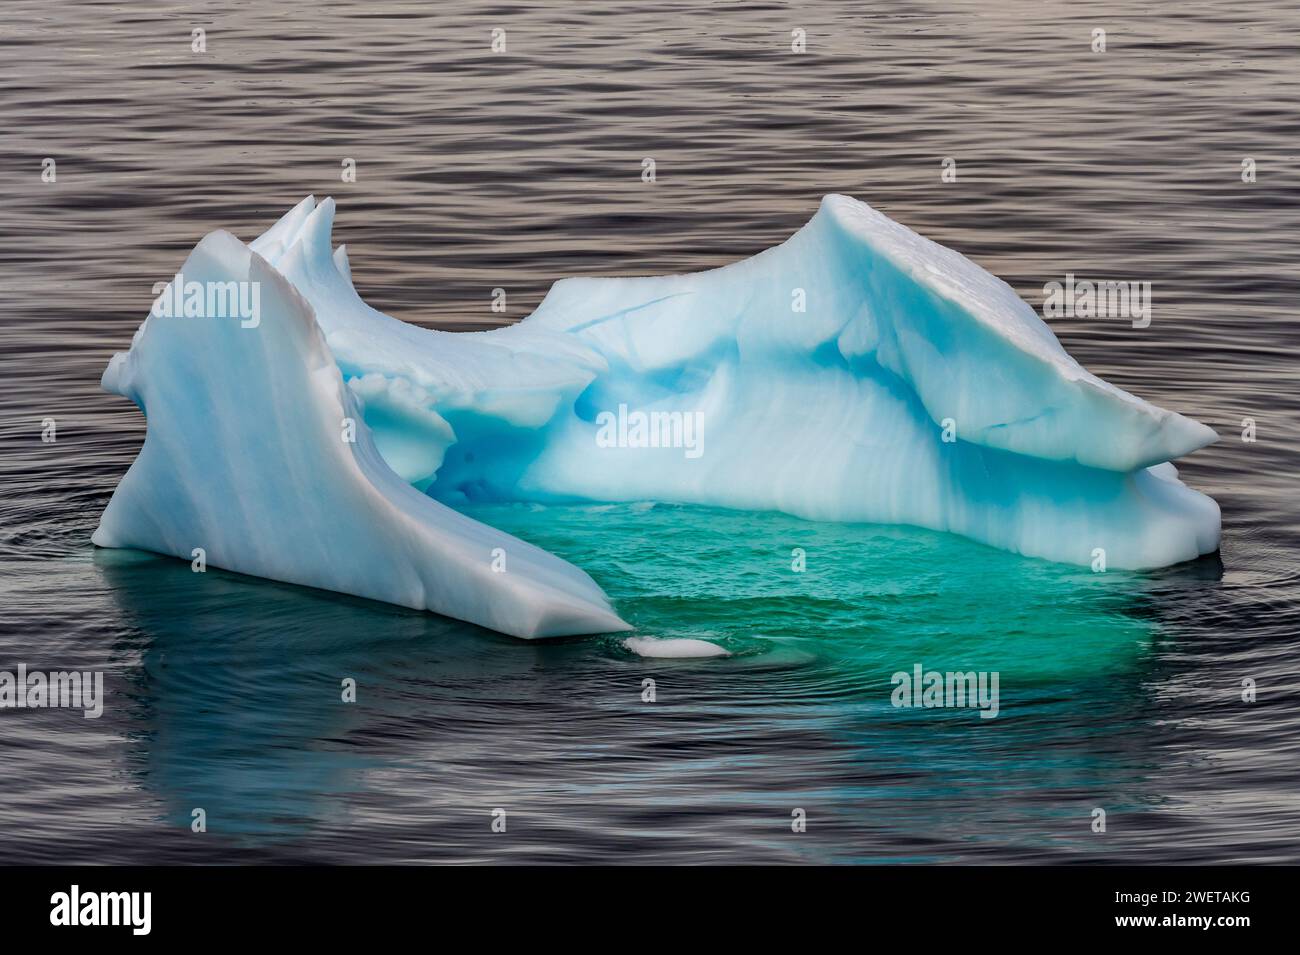 Iceberg with strange shape and vivid colors floating in the water near ...